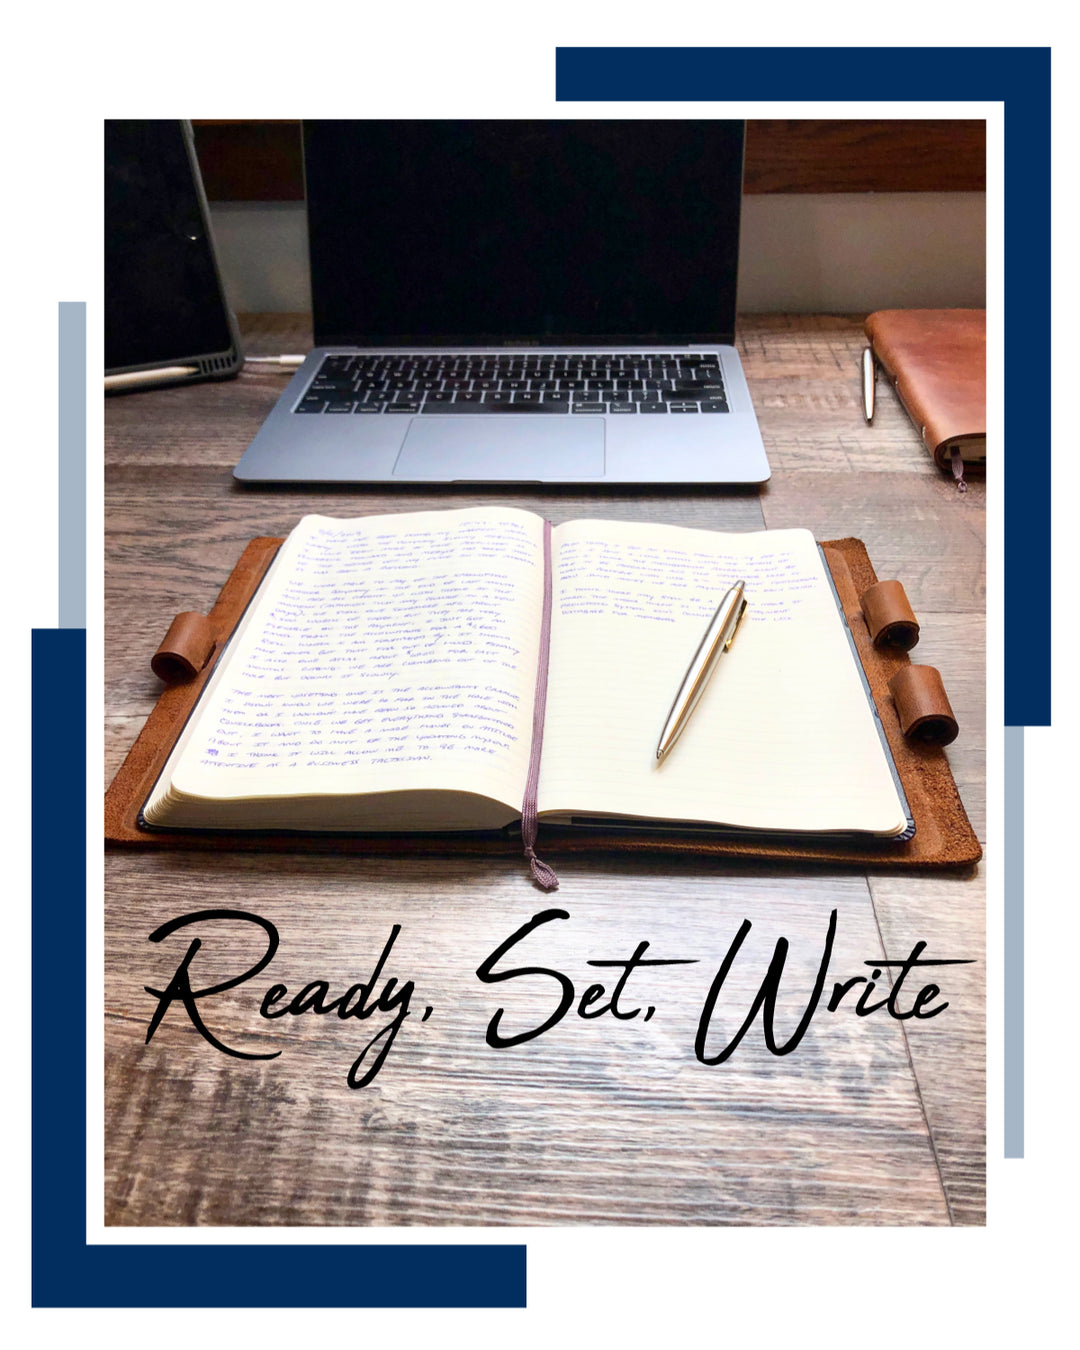 Ready, Set, Write - Pictured: Journal entry in a Murdy Creative Co Espresso Classic Cut Refillable Leather Journal with stainless steel Parker Jotter pen on a desk with a Macbook Pro